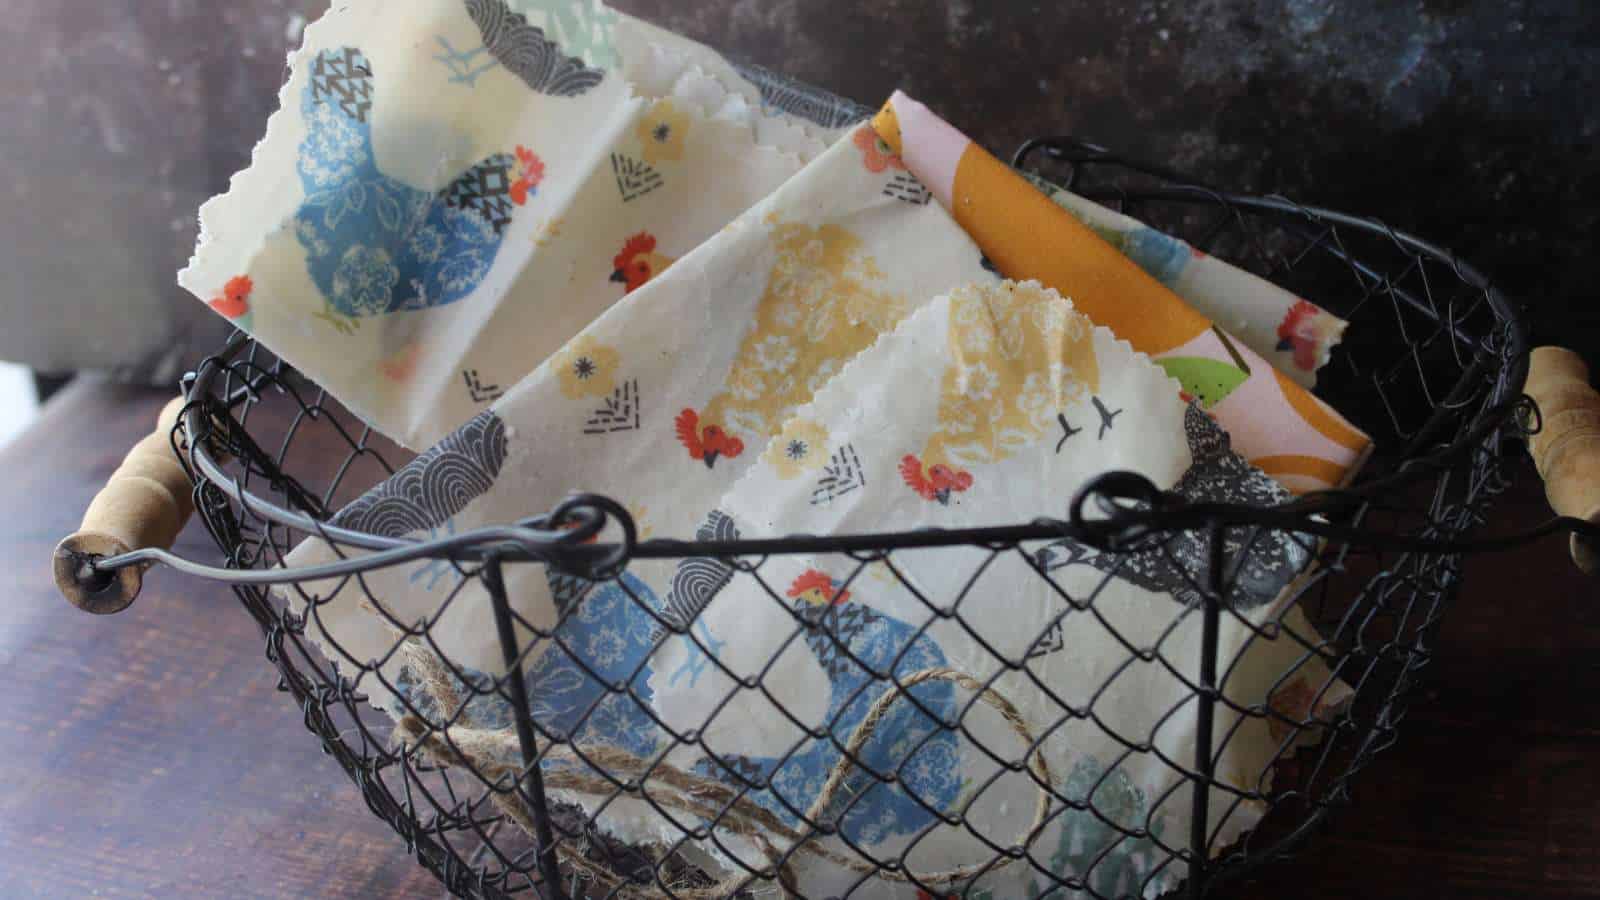 A wire basket filled with beeswax wraps.